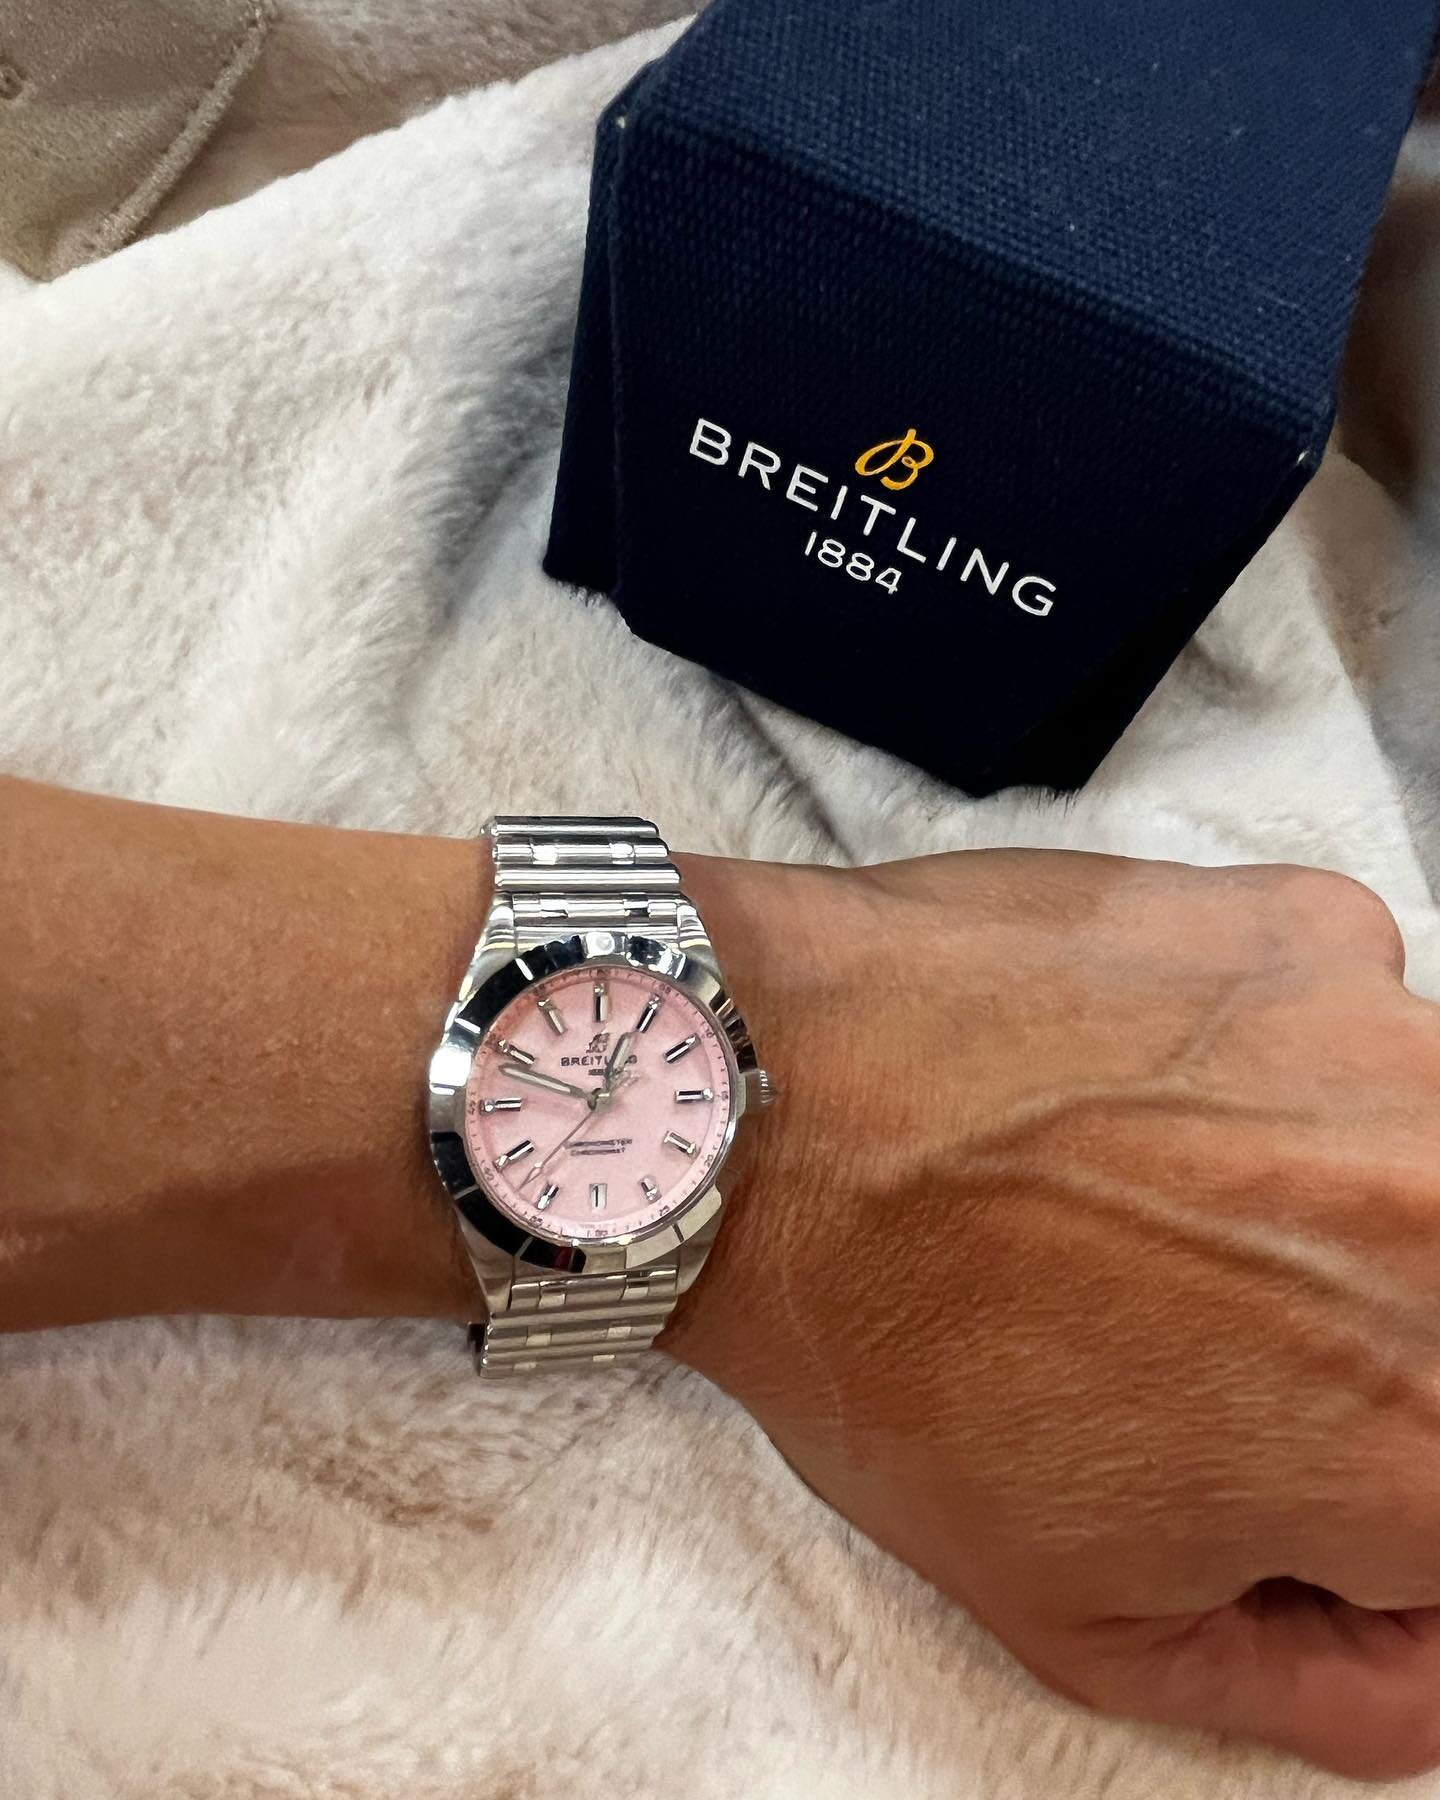 Silver &amp; Pink Designer Watch 
$3,500.95

@greenestreetgateway to purchase.
🧐 Inquiries? 💝 Connect with us!
📞 (484) 367-7412
📧 gateway@greenestreet.com

@greenestreetgateway is not affiliated with the brands we sell. All copyrights remain with